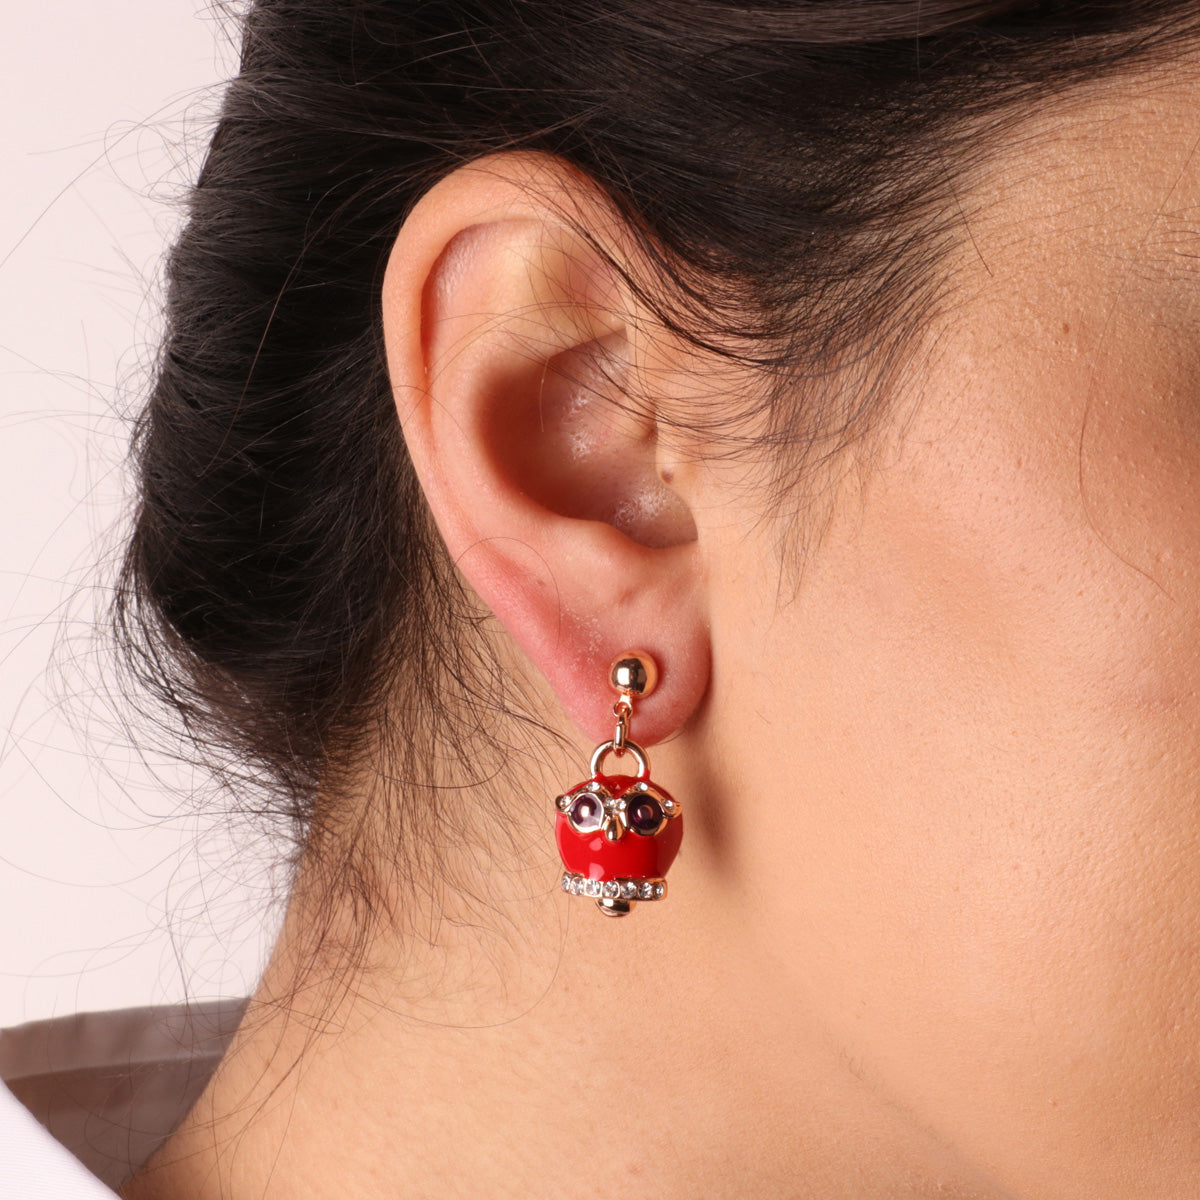 Metal earrings with owl charming bell, embellished with red enamel and crystals